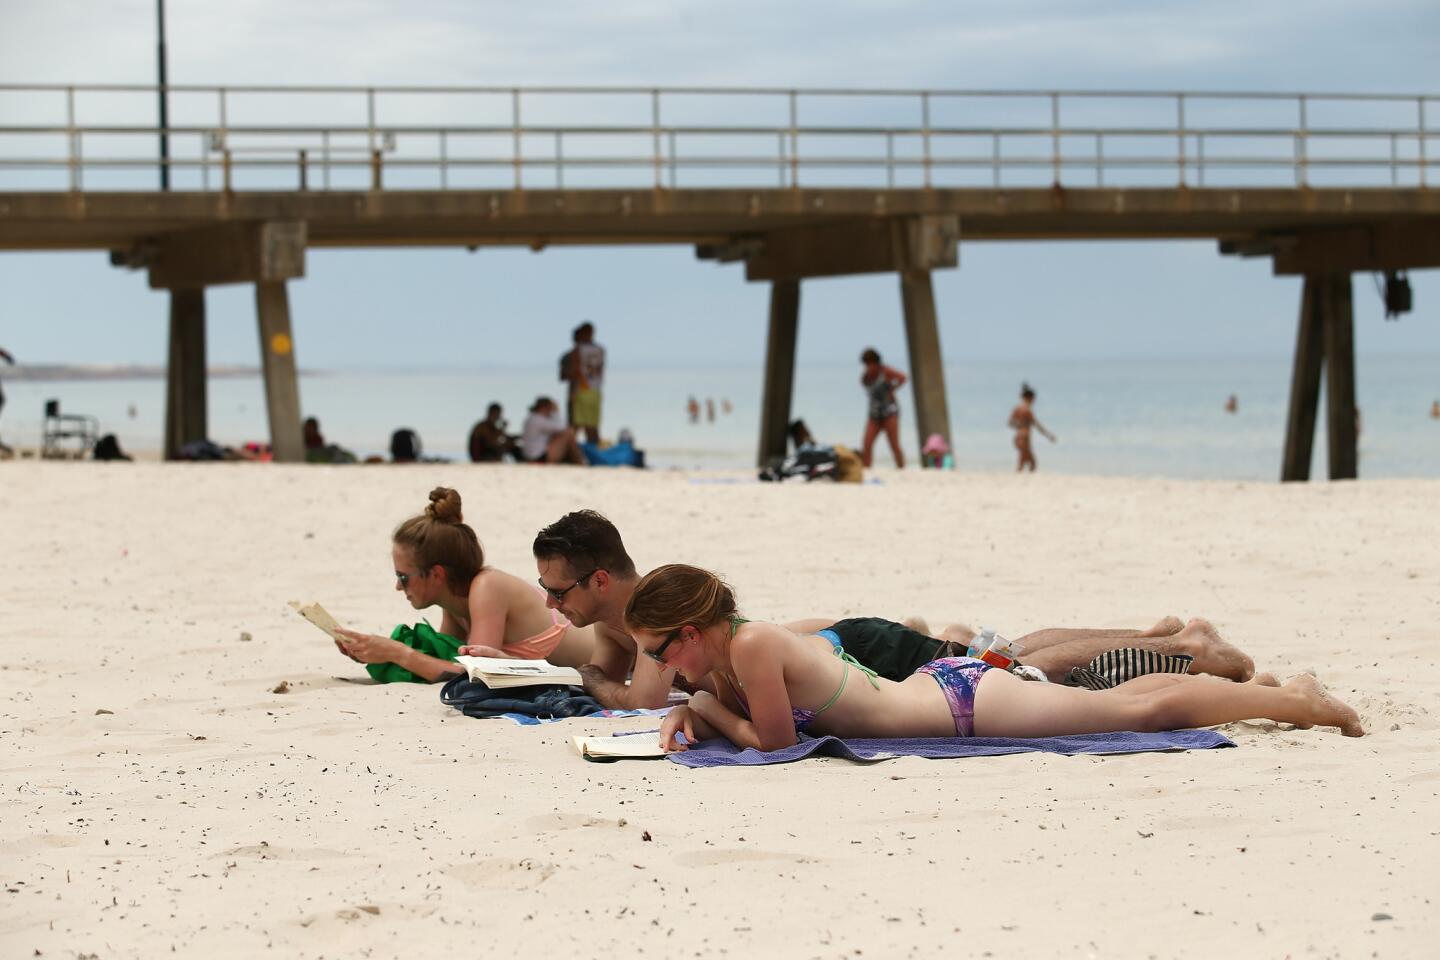 Beachgoers relax on Glenelg Beach on Dec. 19, 2015 in Adelaide, Australia, during a heat wave when temperatures topped 40 degrees Celsius (104 degrees Fahrenheit). It's summer Down Under and Adelaide is popular for its wineries, public gardens and architecture.